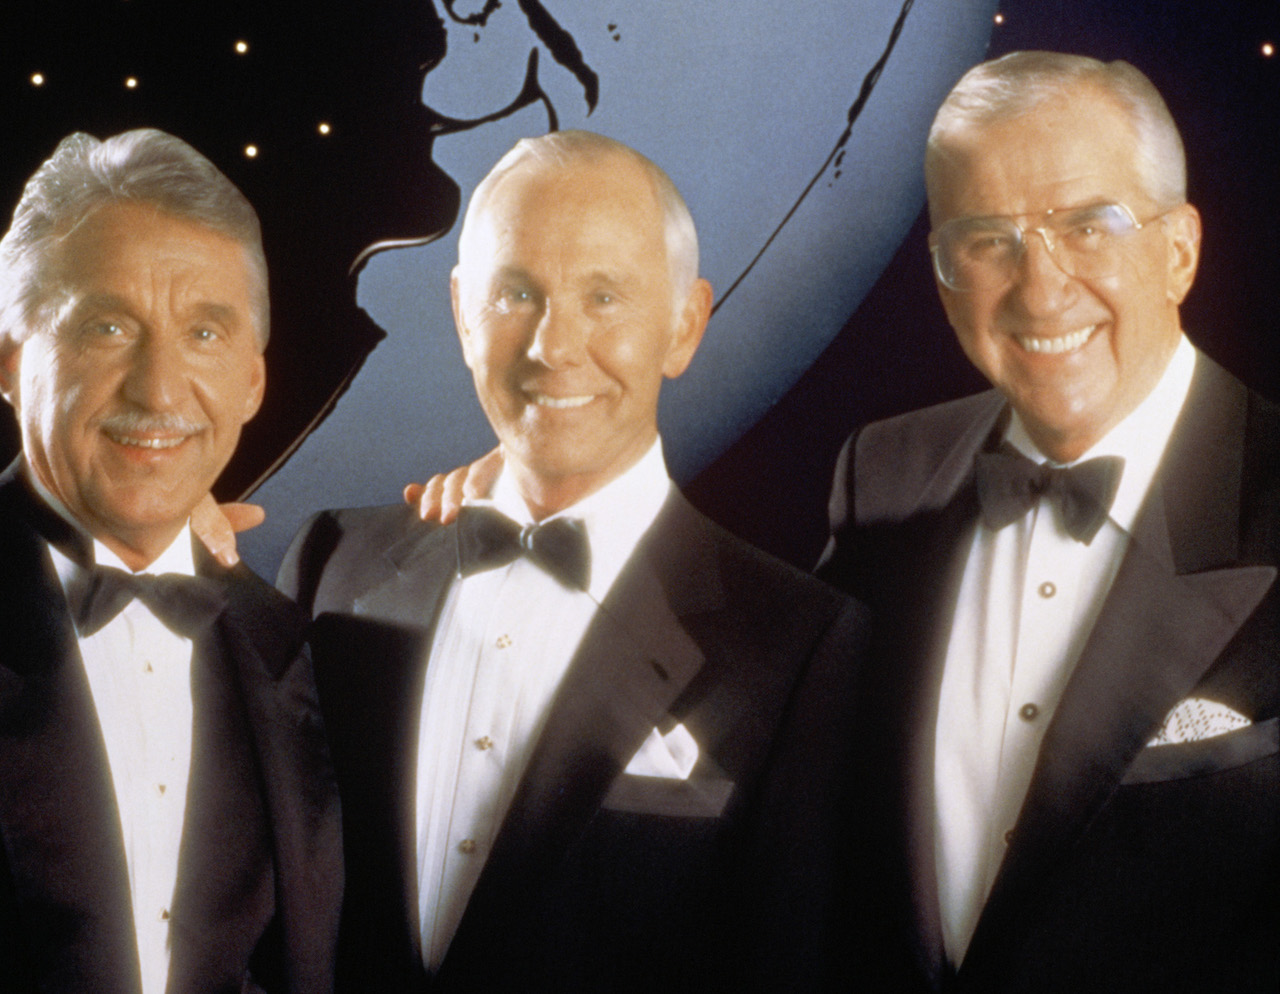 'The Tonight Show' Band leader Doc Severinsen, host Johnny Carson, co-host Ed McMahon in black and white tuxedoes